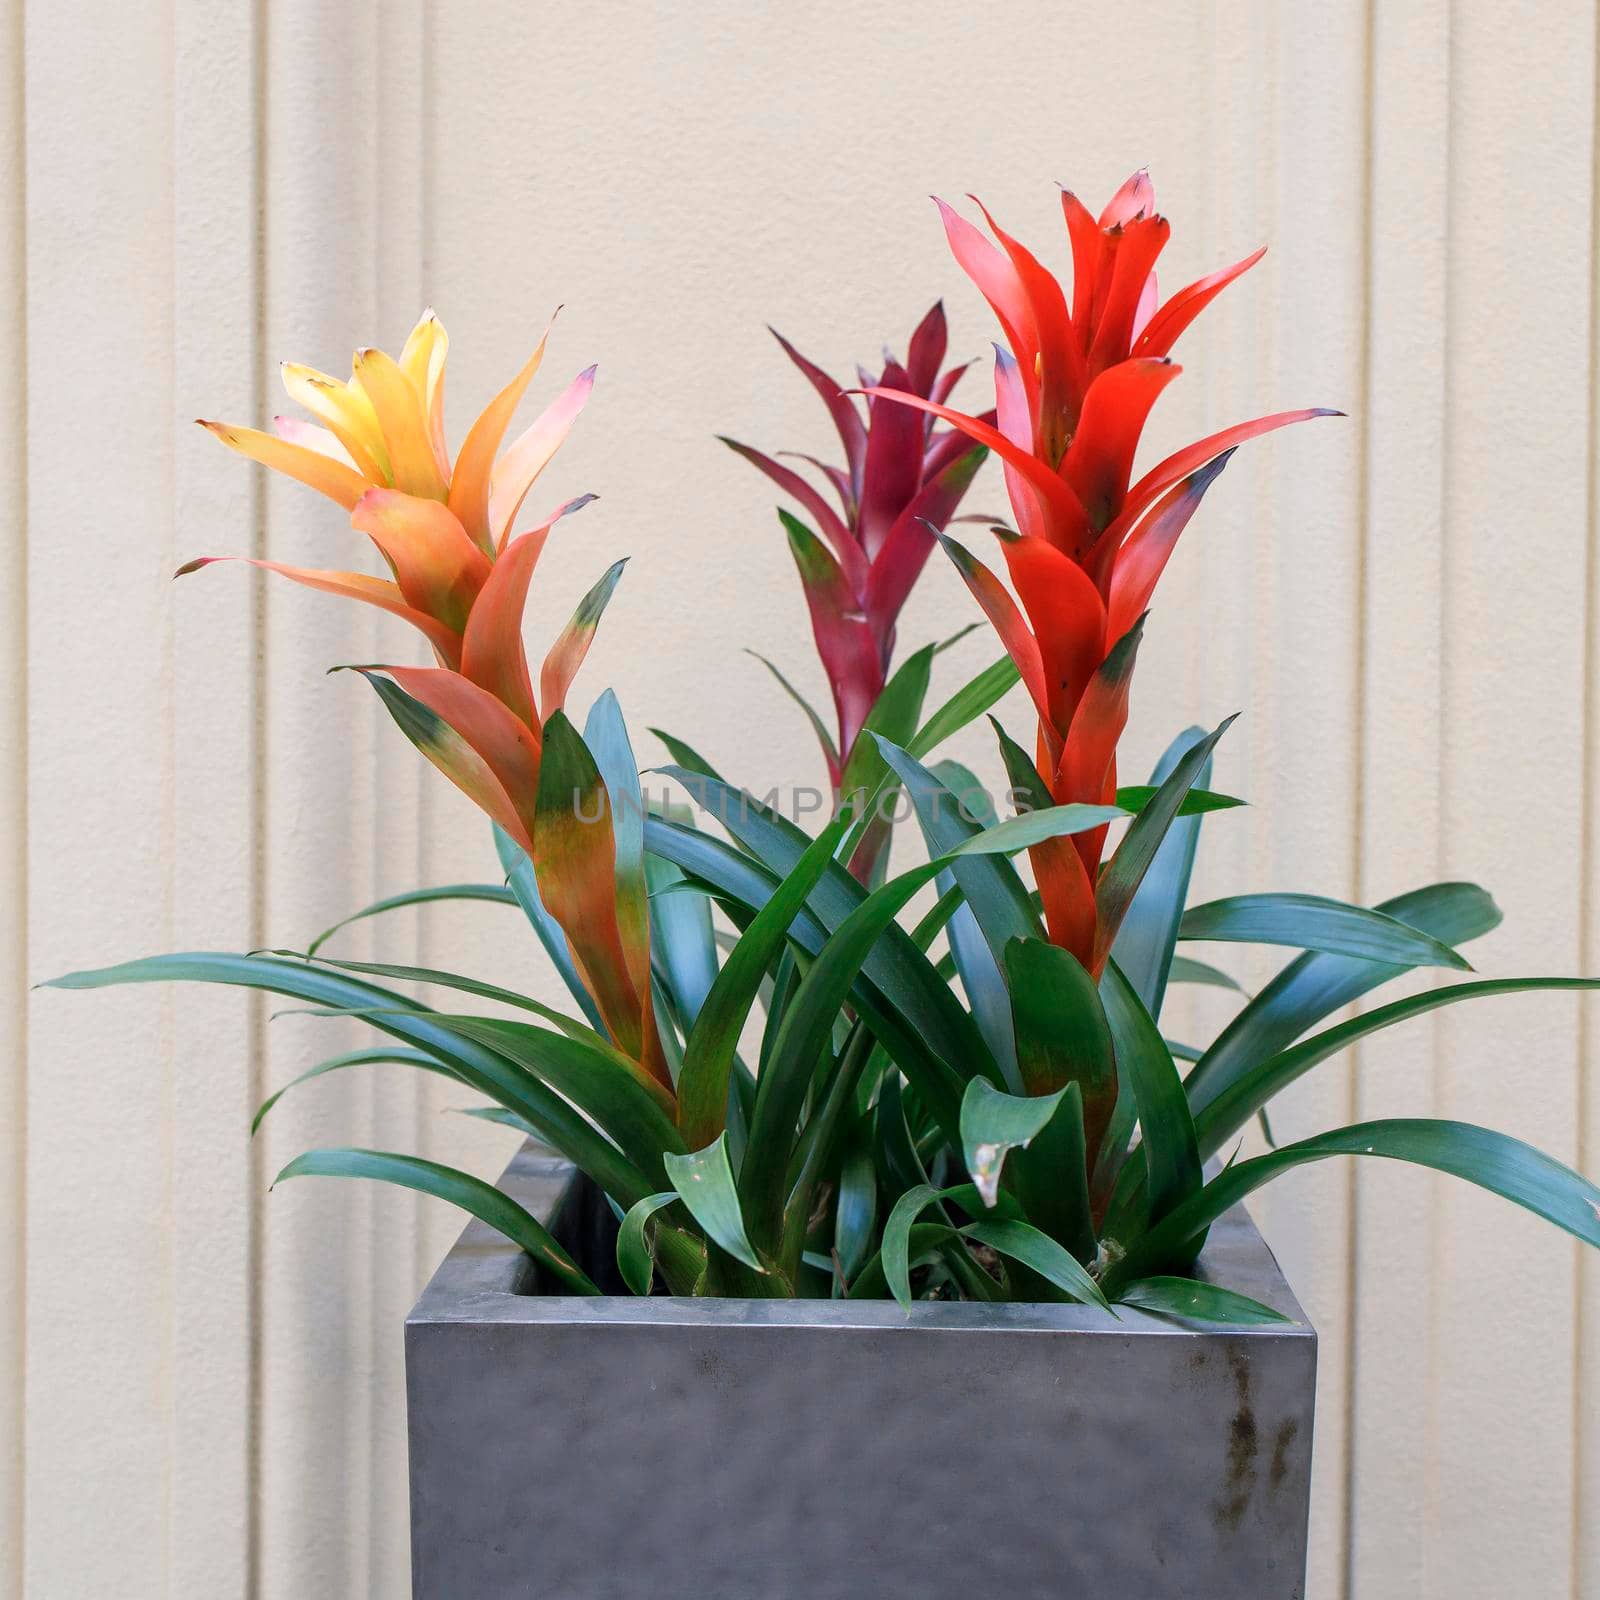 Yellow and red Guzmania in a large flower pot as an interior decoration by elenarostunova